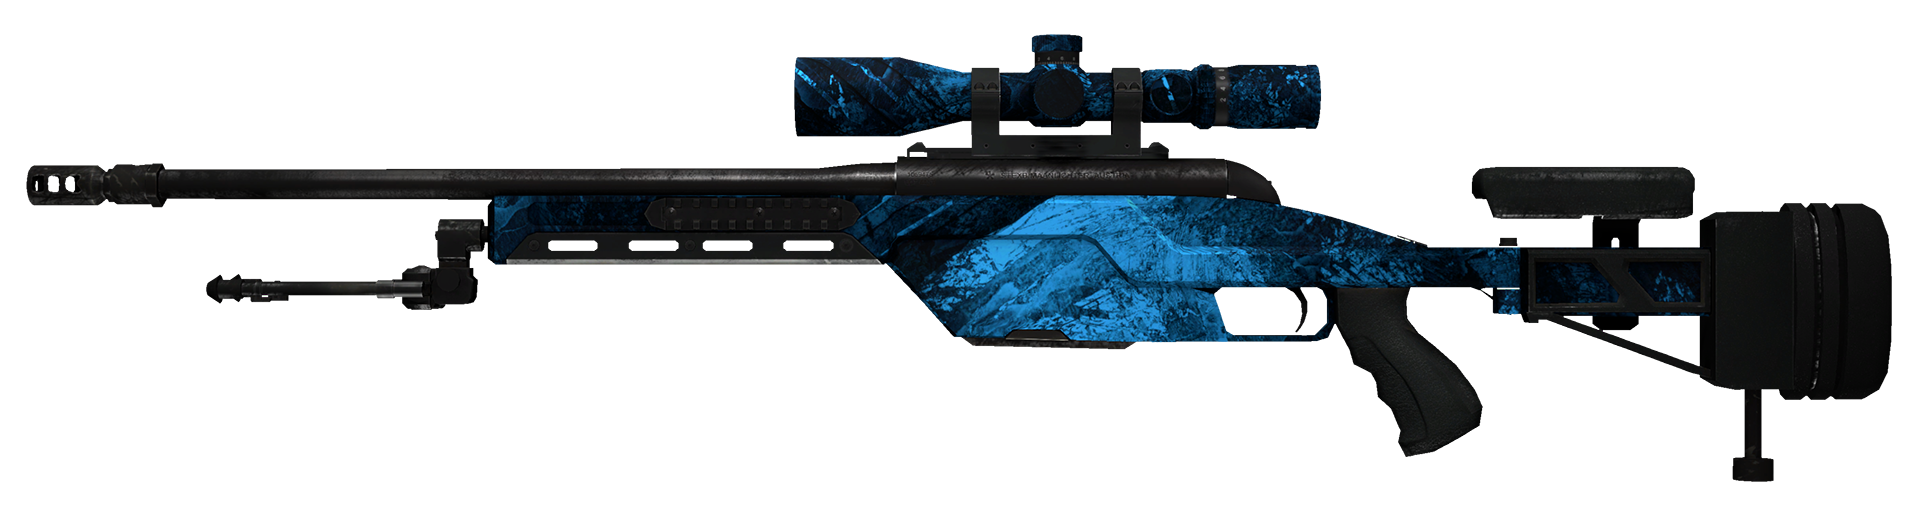 Abyss Furnace cs go skin download the new for android